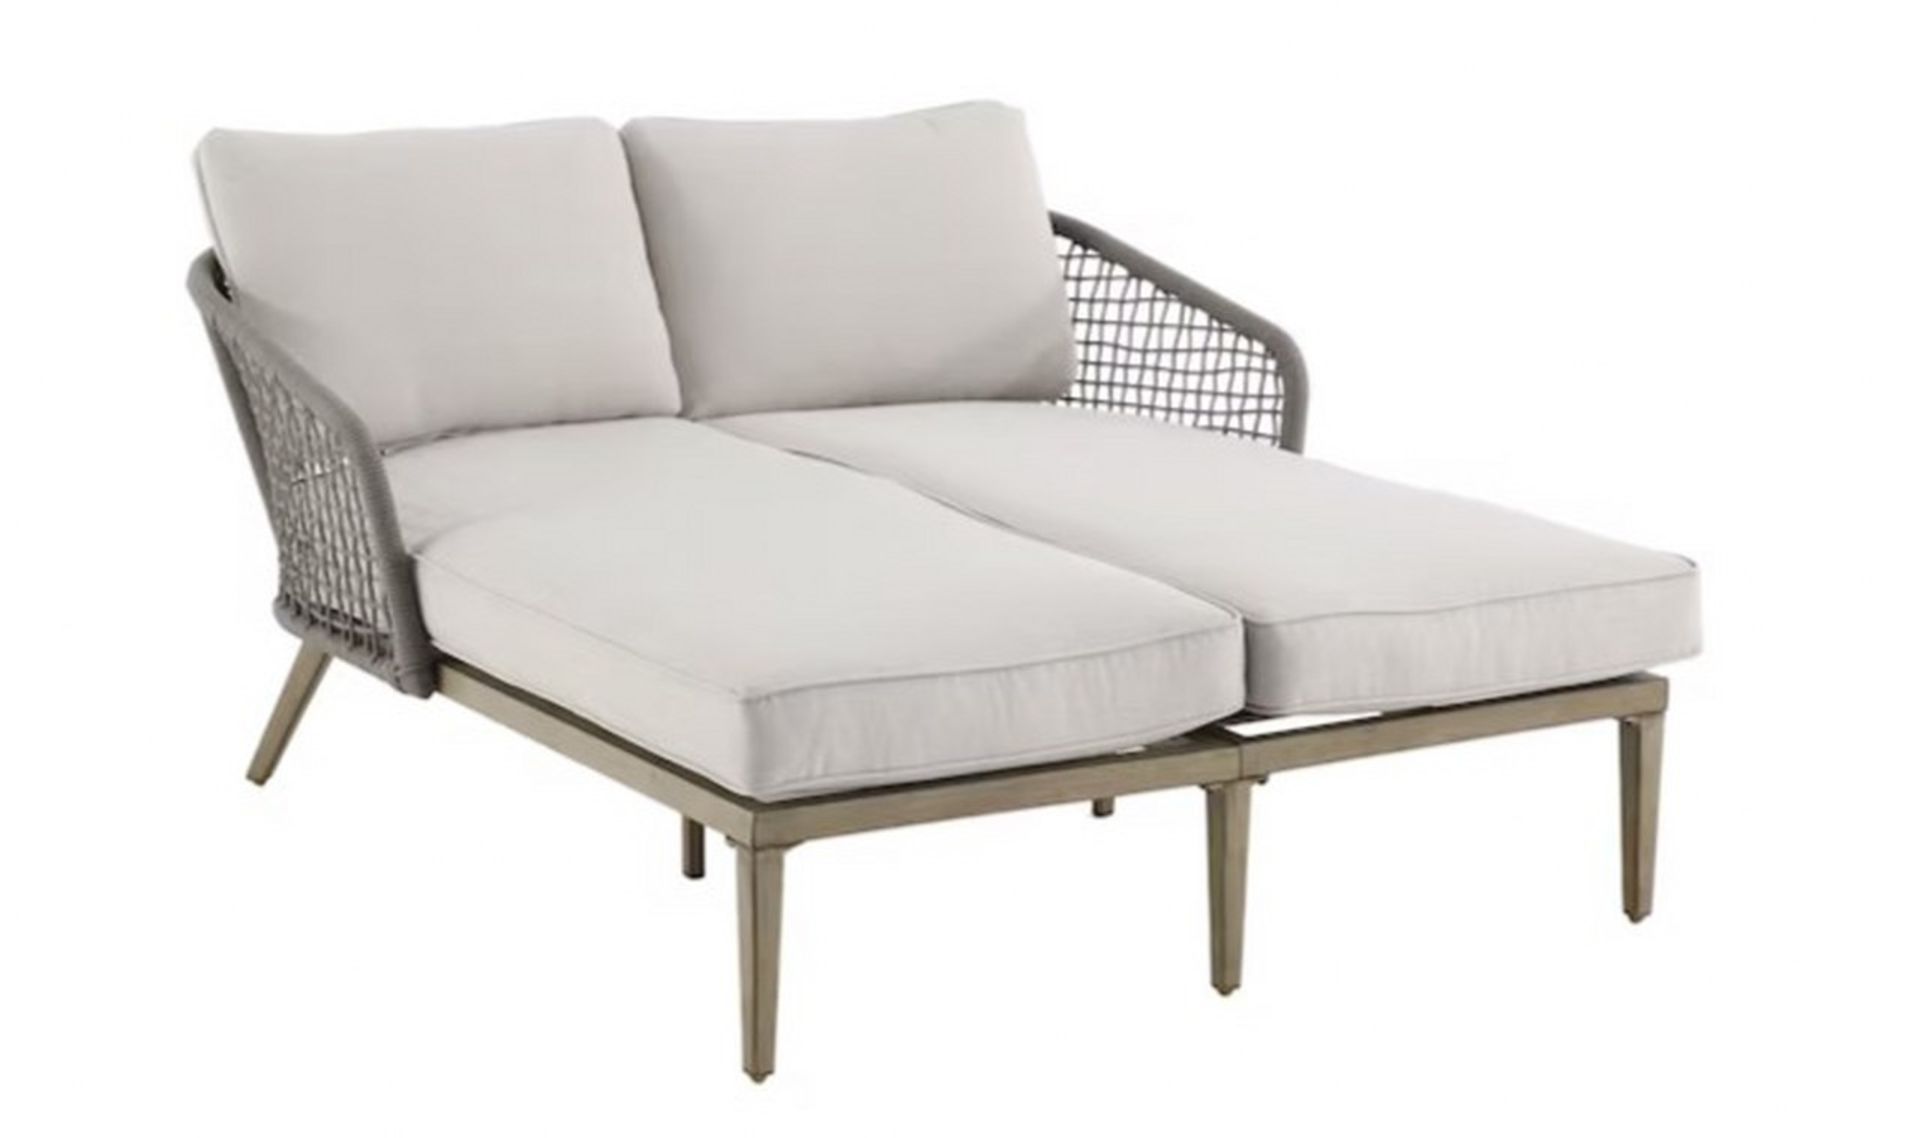 Allen + Roth - Wicker Outdoor Loveseat with White Cushion(S) and Aluminum Frame